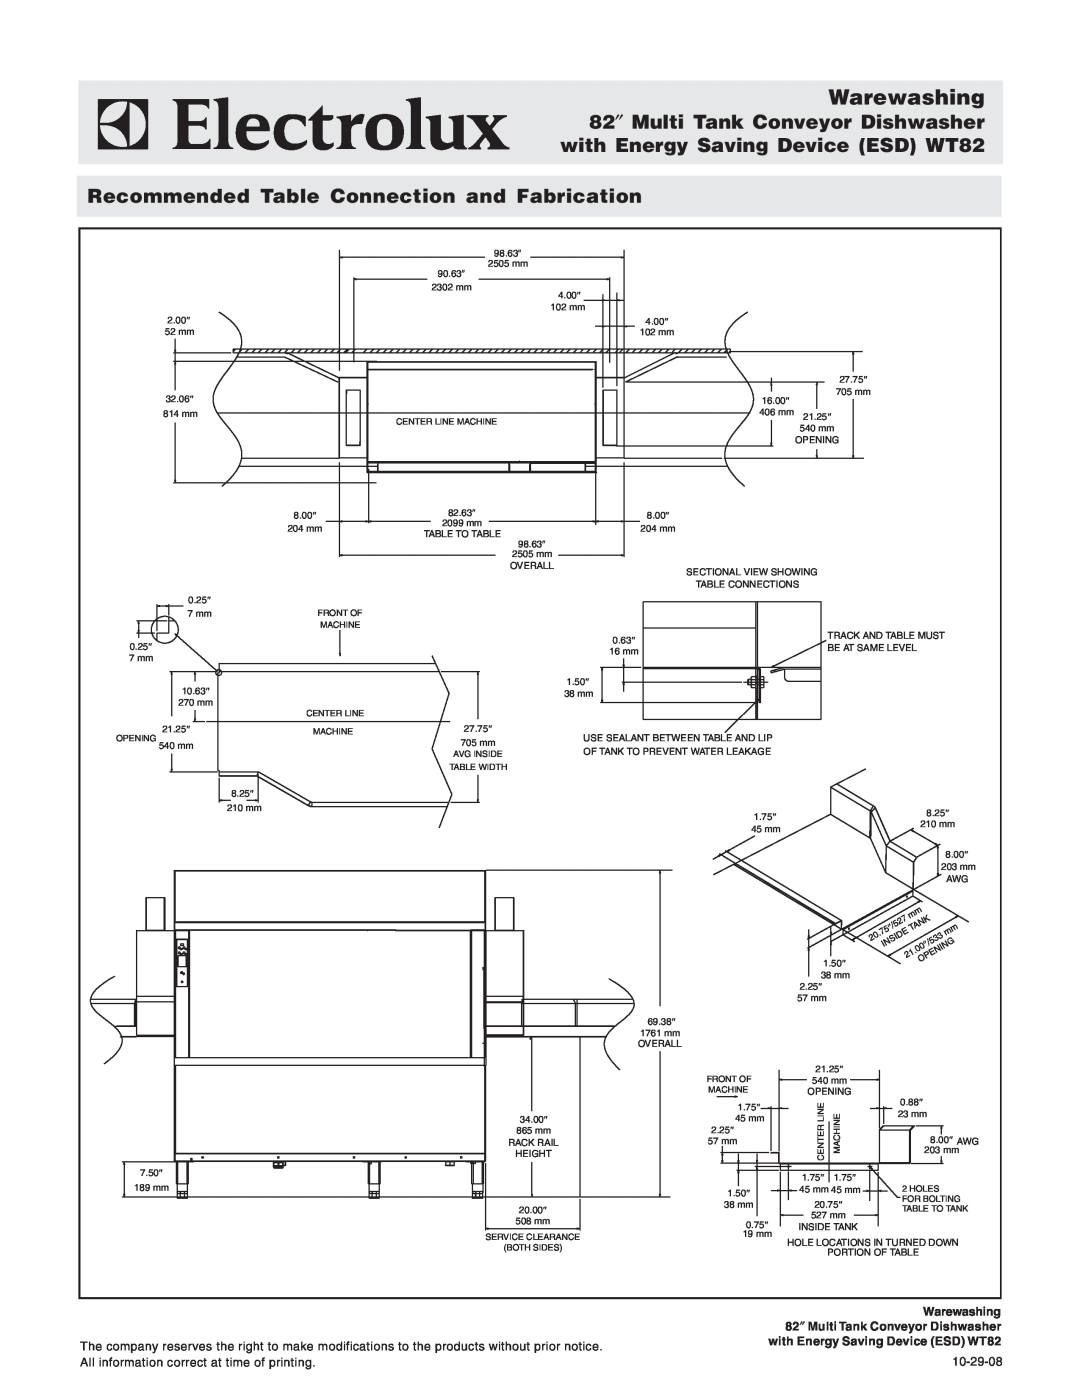 Electrolux 534176 Recommended Table Connection and Fabrication, Warewashing, 82″ Multi Tank Conveyor Dishwasher, 10-29-08 